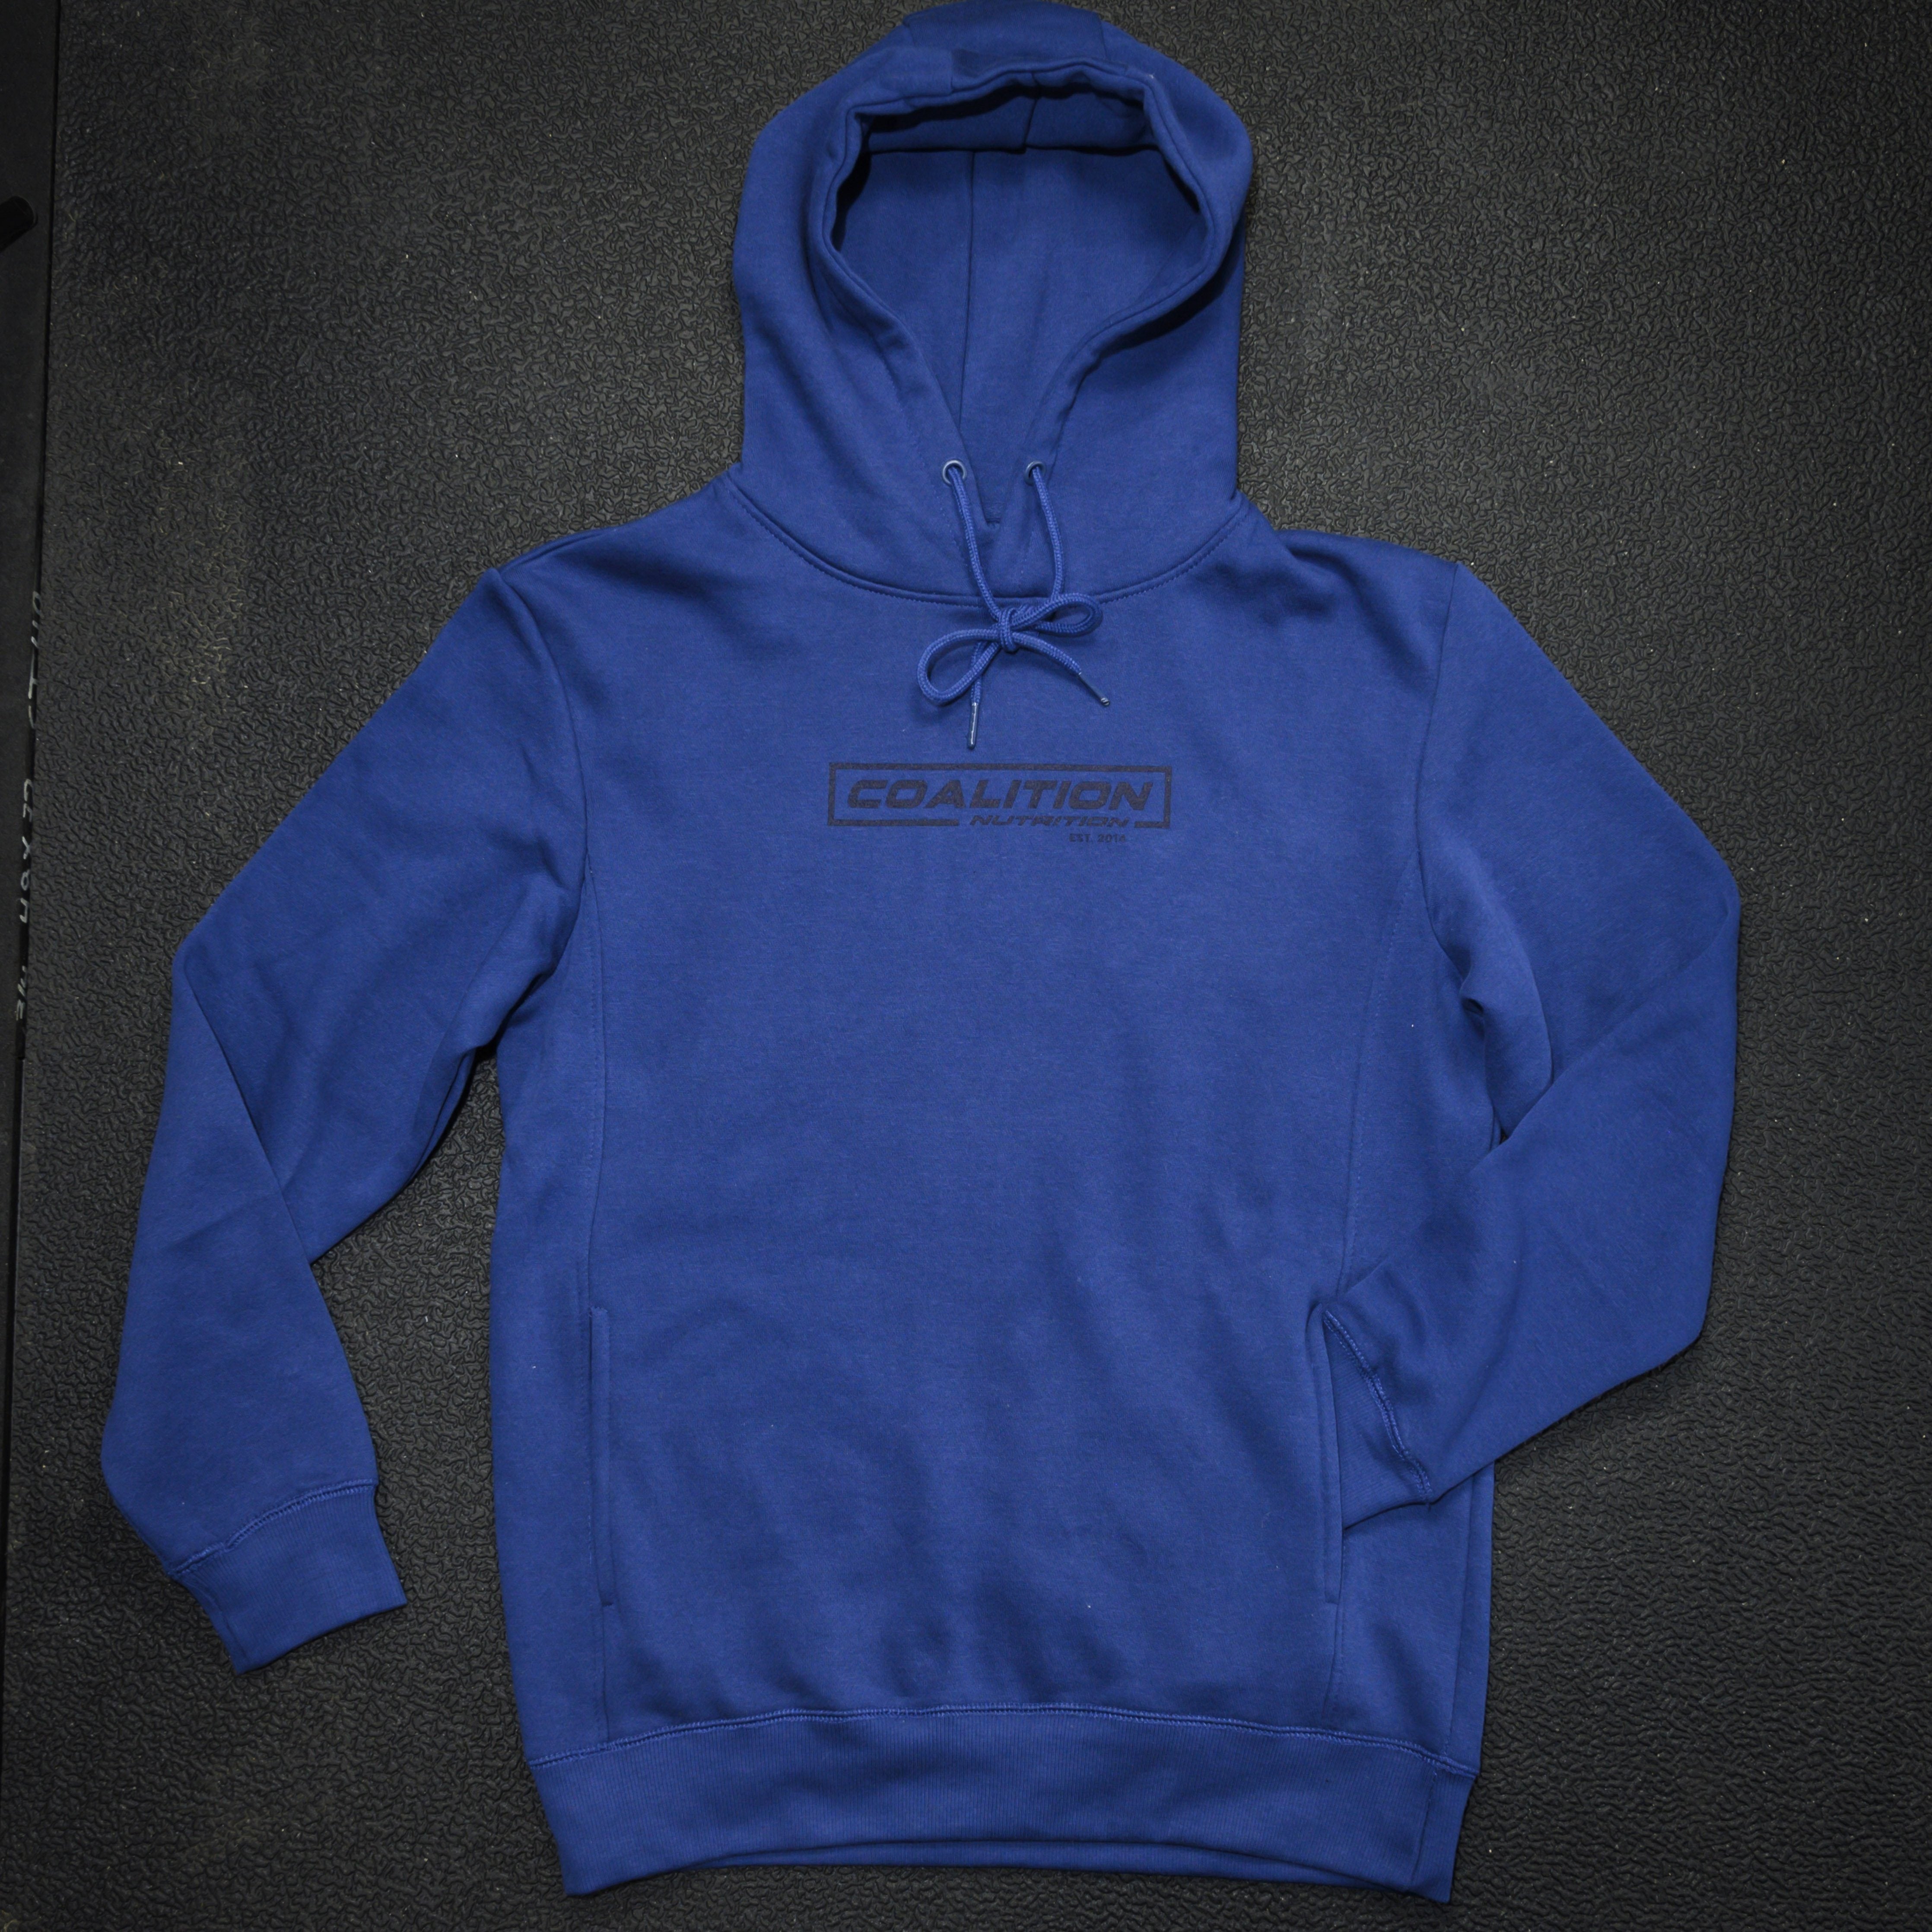 Coalition Nutrition Premium Pullover Hoody